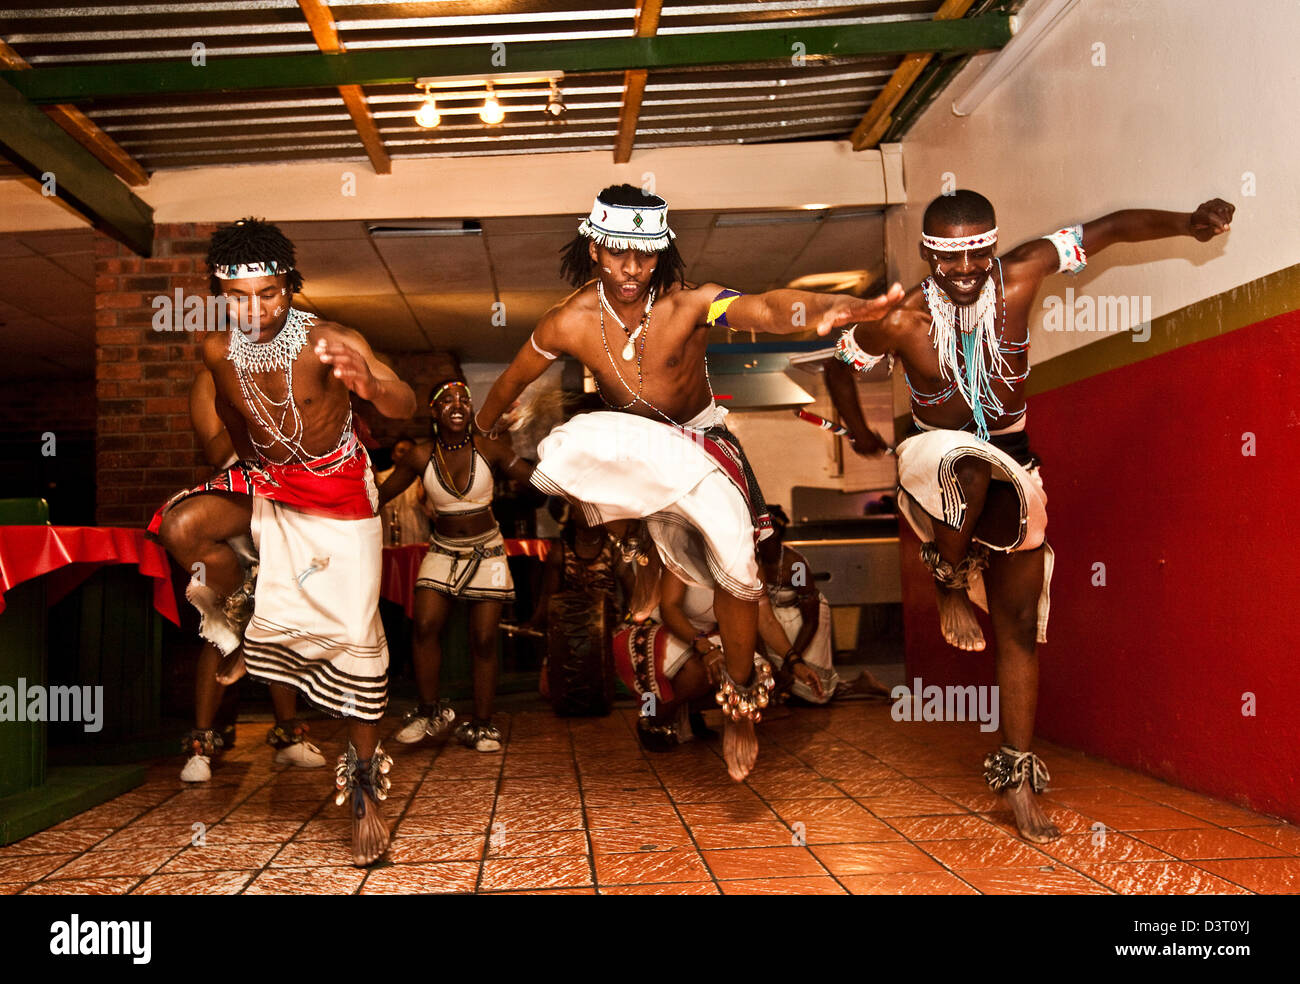 Local entertainment, Shebeen dancers, South Africa Stock Photo